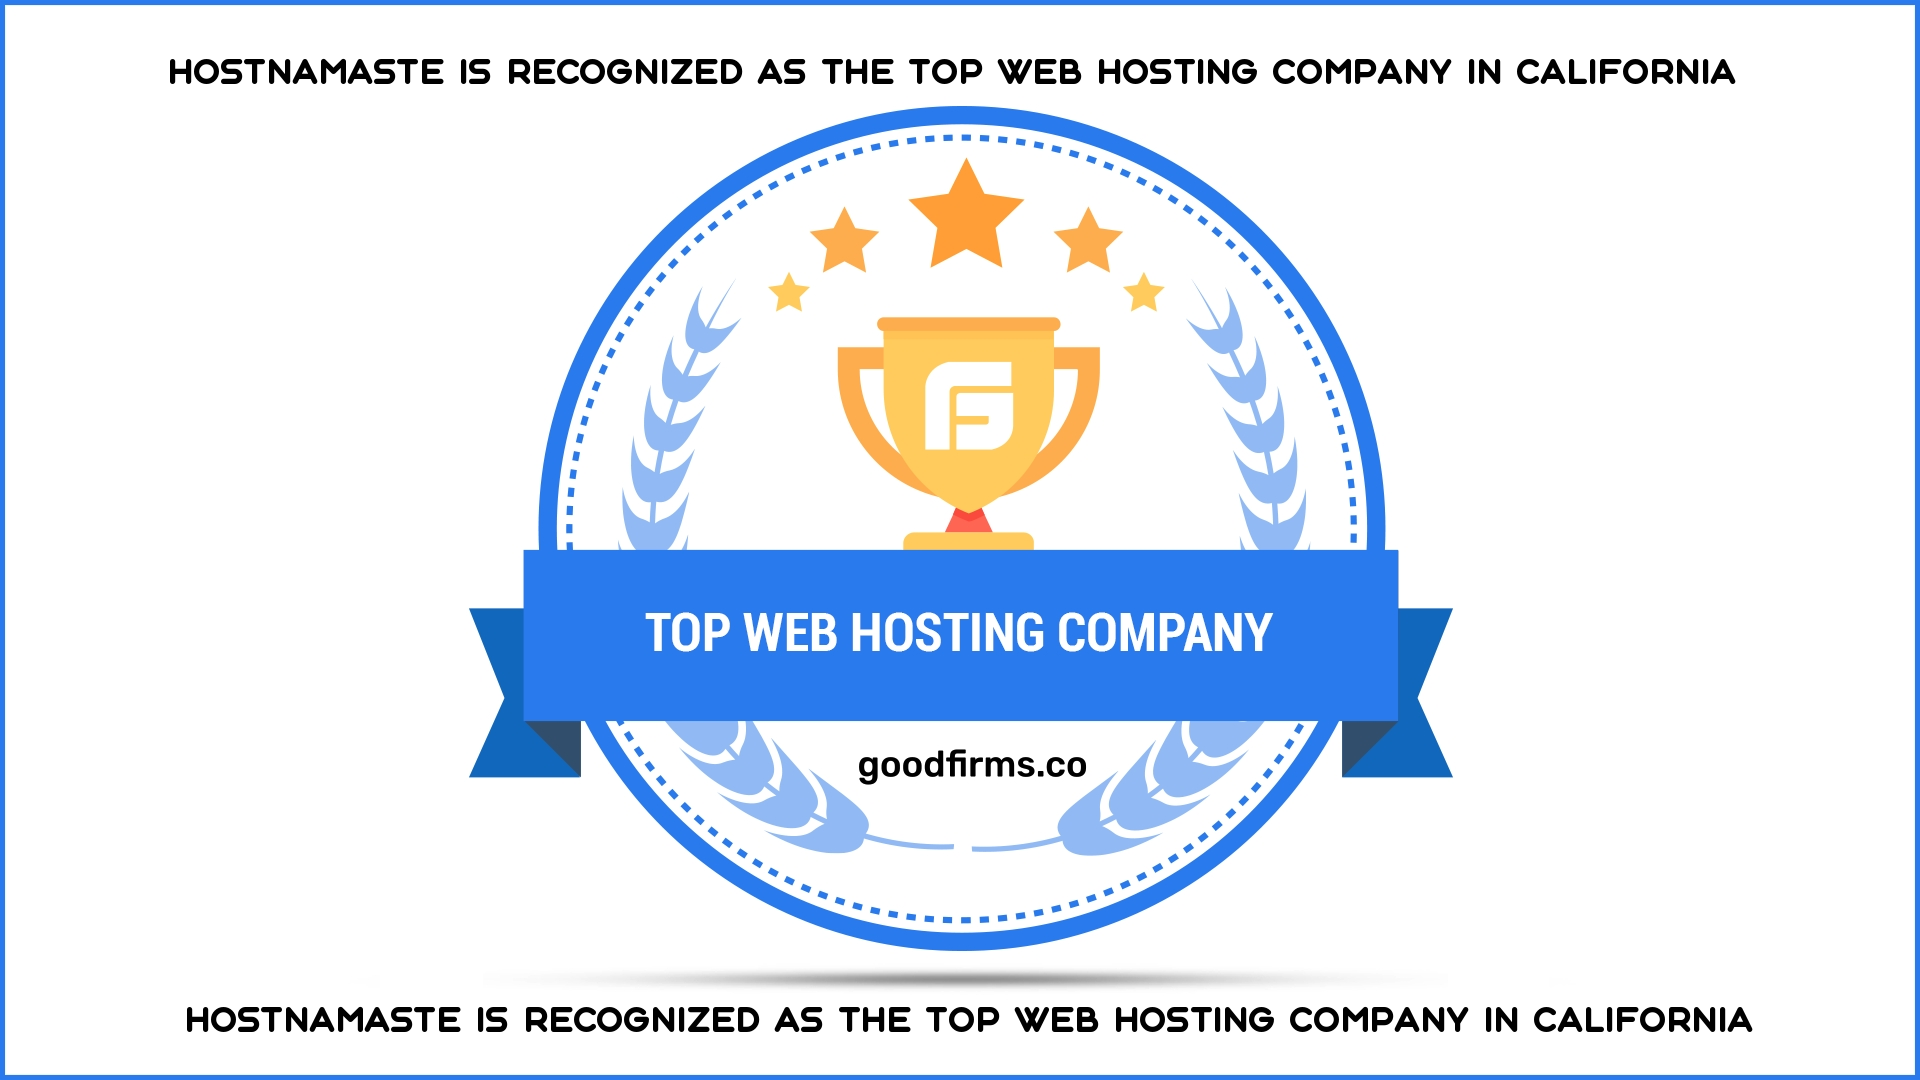 HostNamaste is Recognized As The Top Web Hosting Company in California